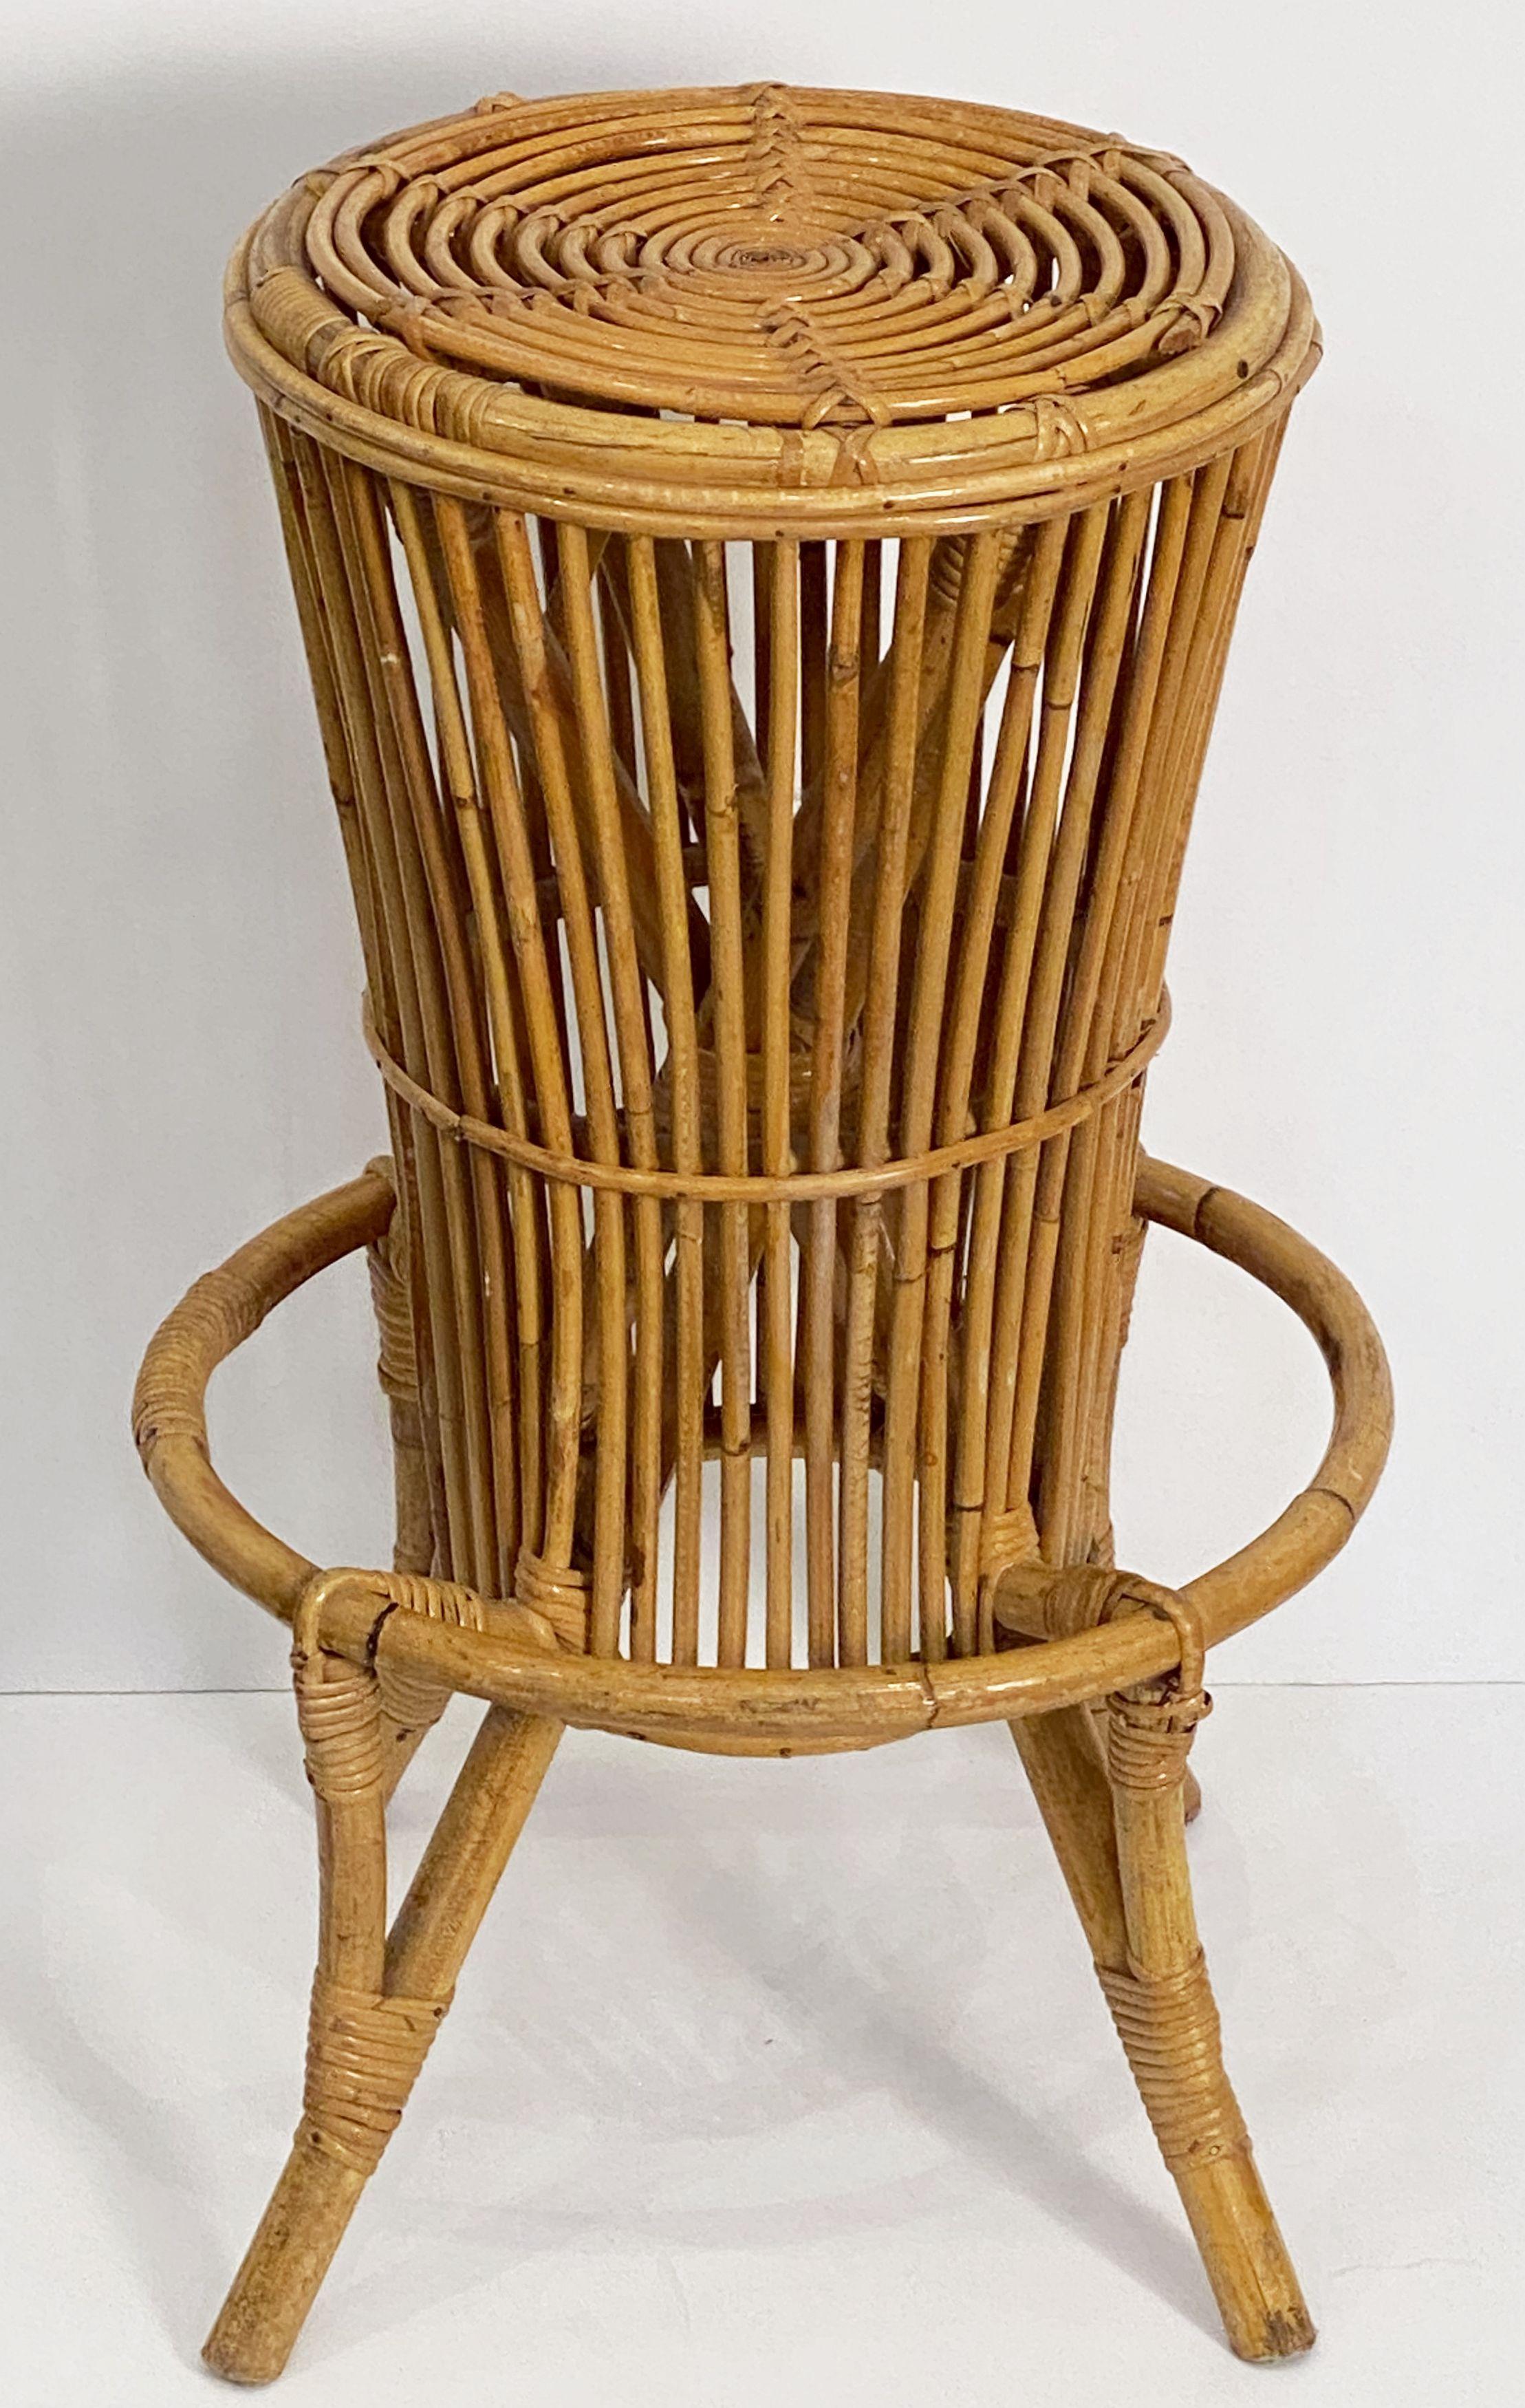 Italian Stool of Rattan and Bamboo from the Mid-20th Century For Sale 8